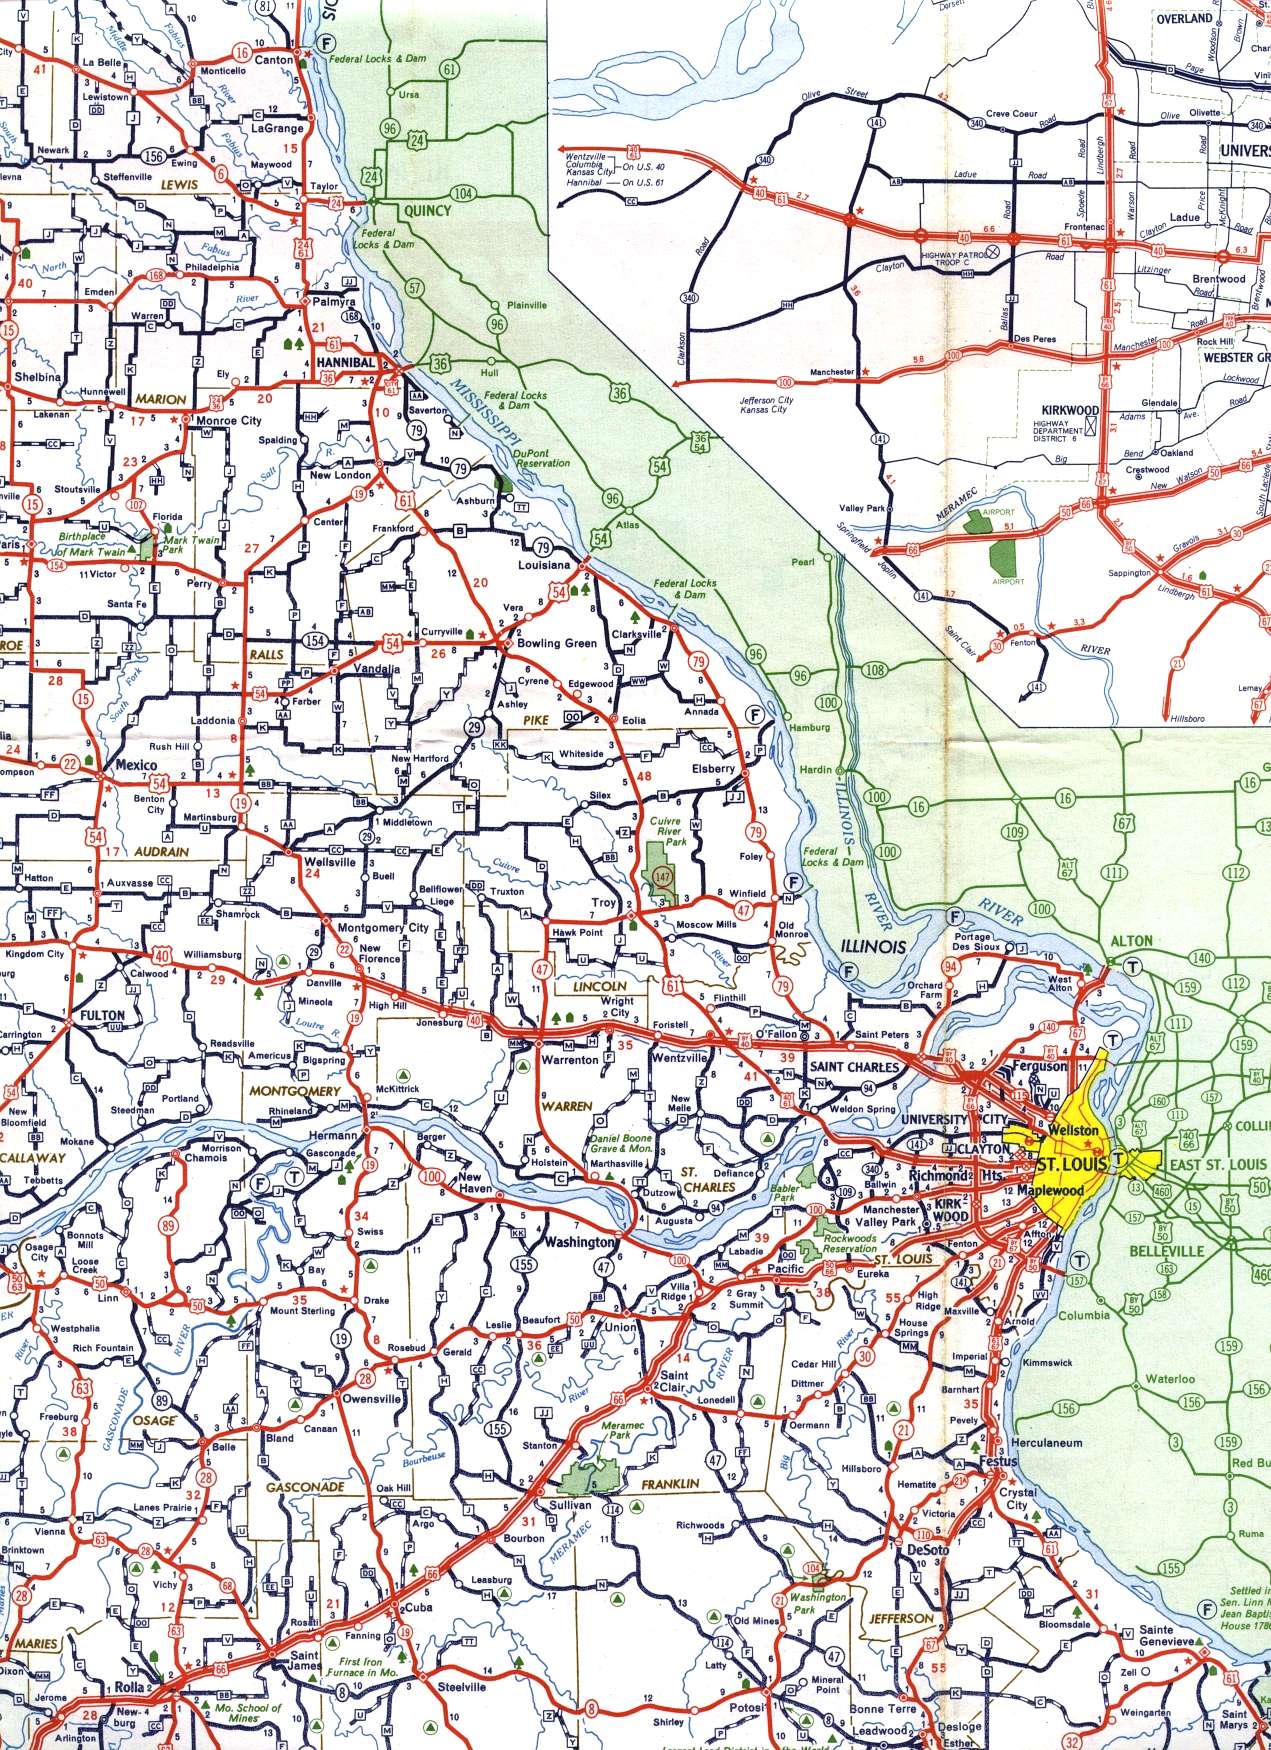 East-central section of Missouri from 1958 official highway map